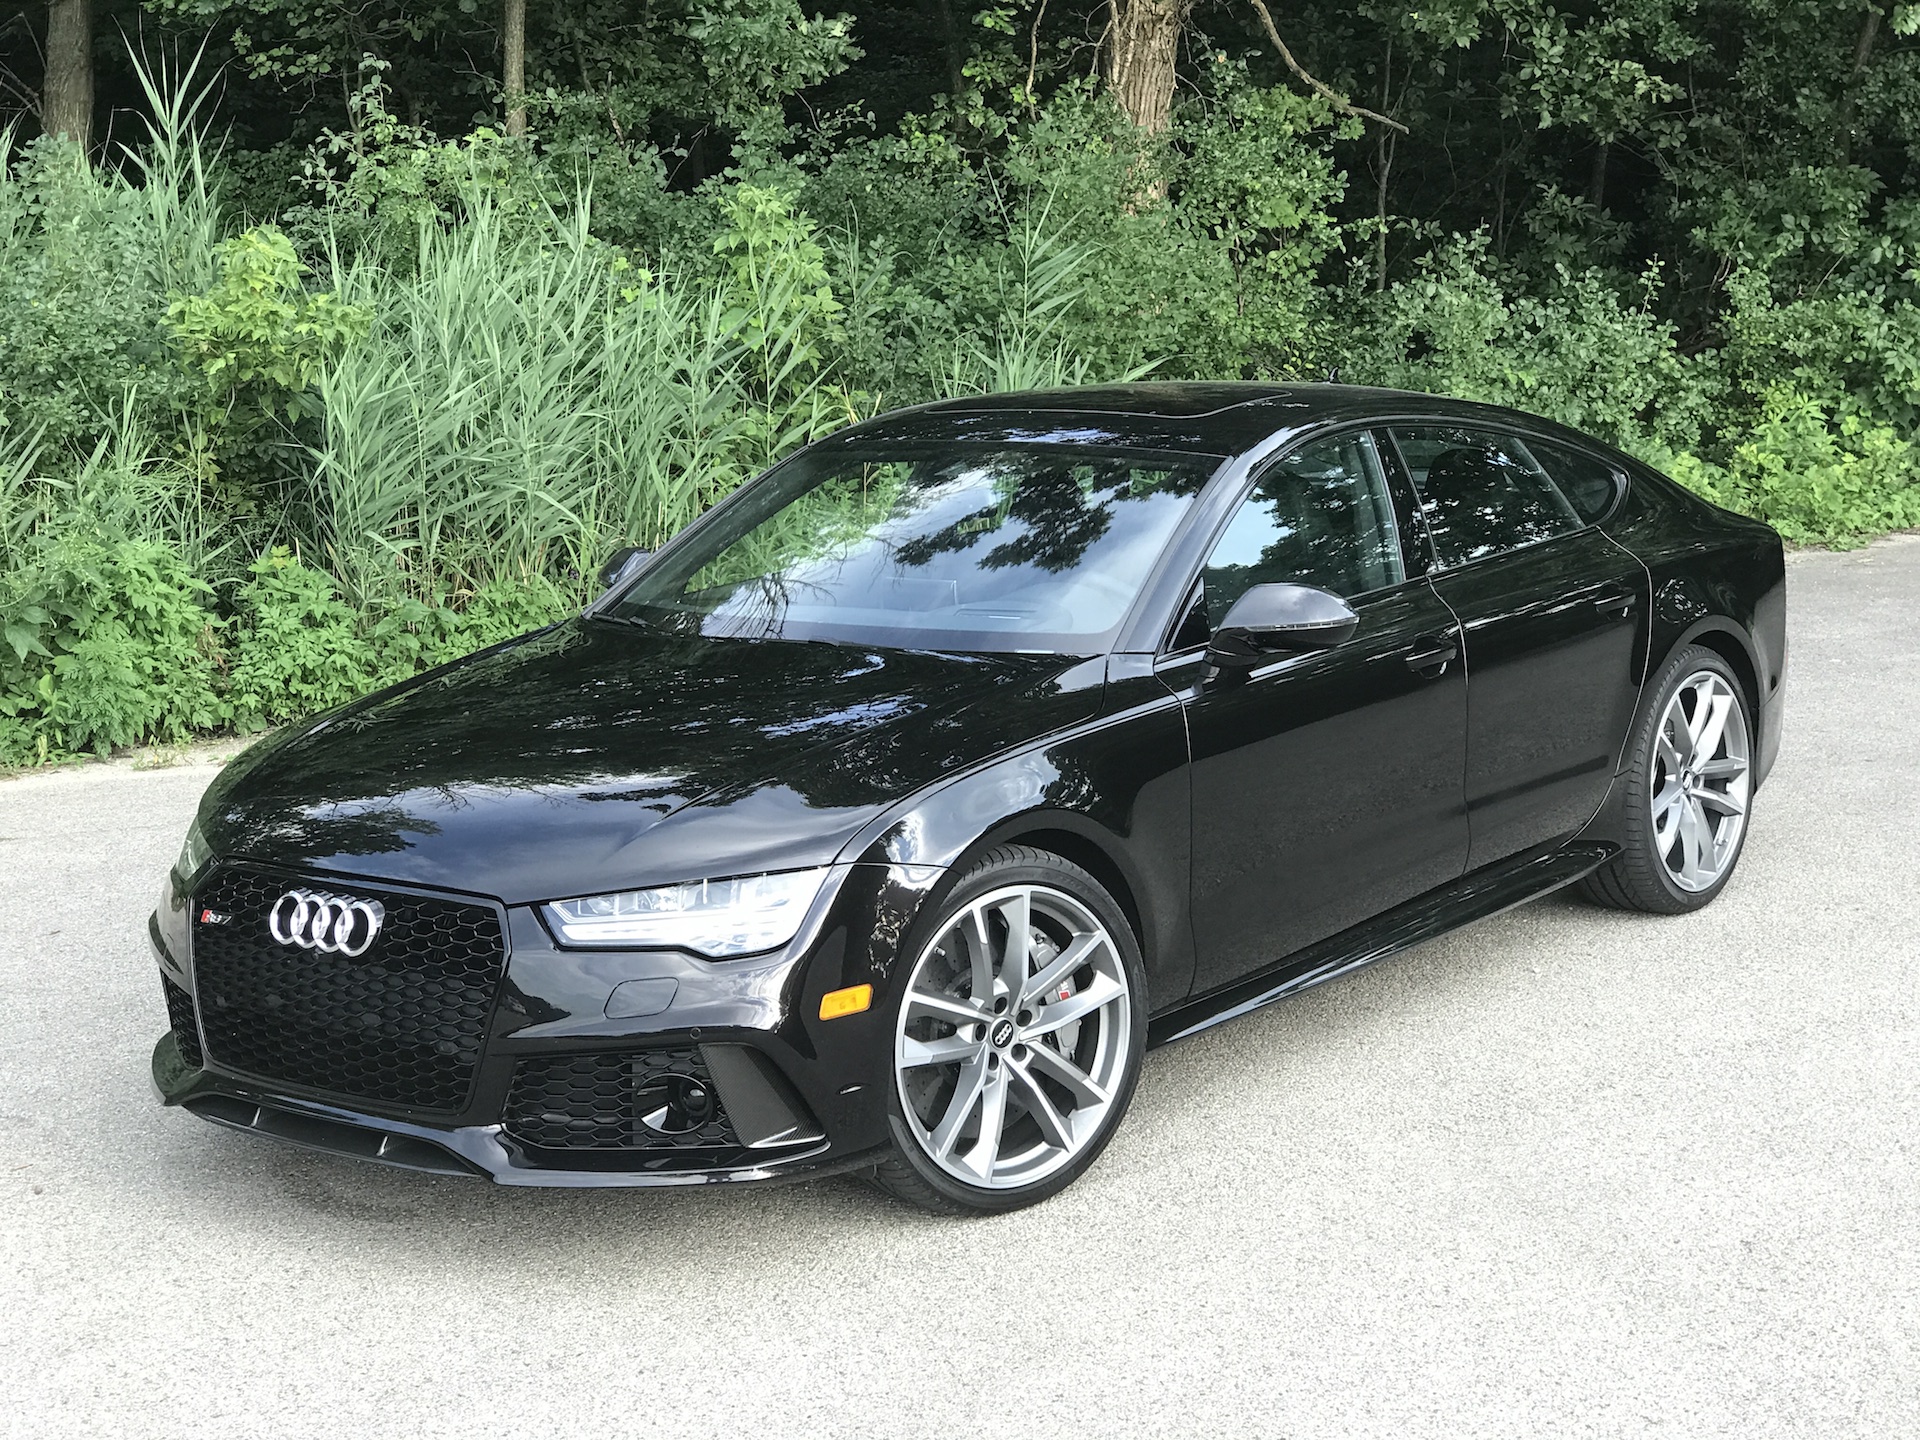 2017 Audi Rs 7 Performance First Drive Review Living With A 137k Hatchback